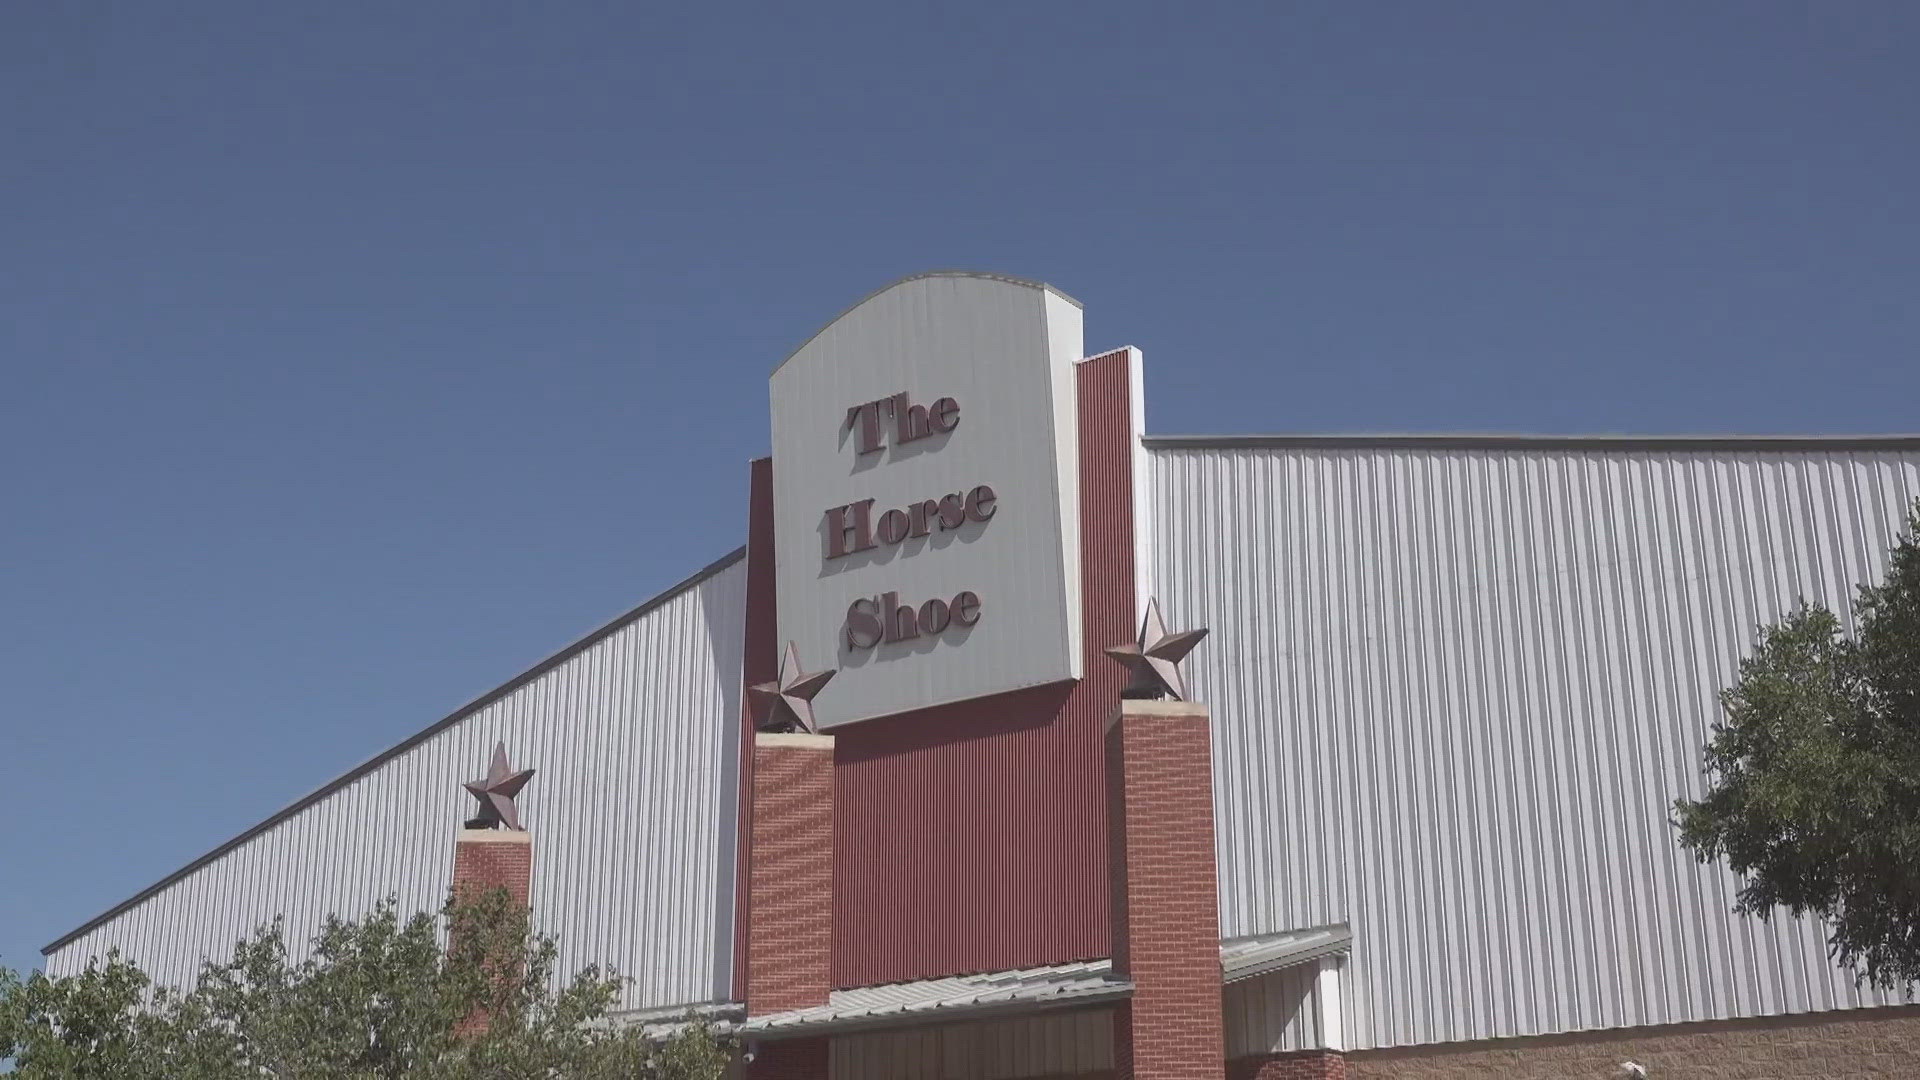 People will be able to buy concessions again at the Midland County Horseshoe. However, the county will be selective on which events will have concessions.